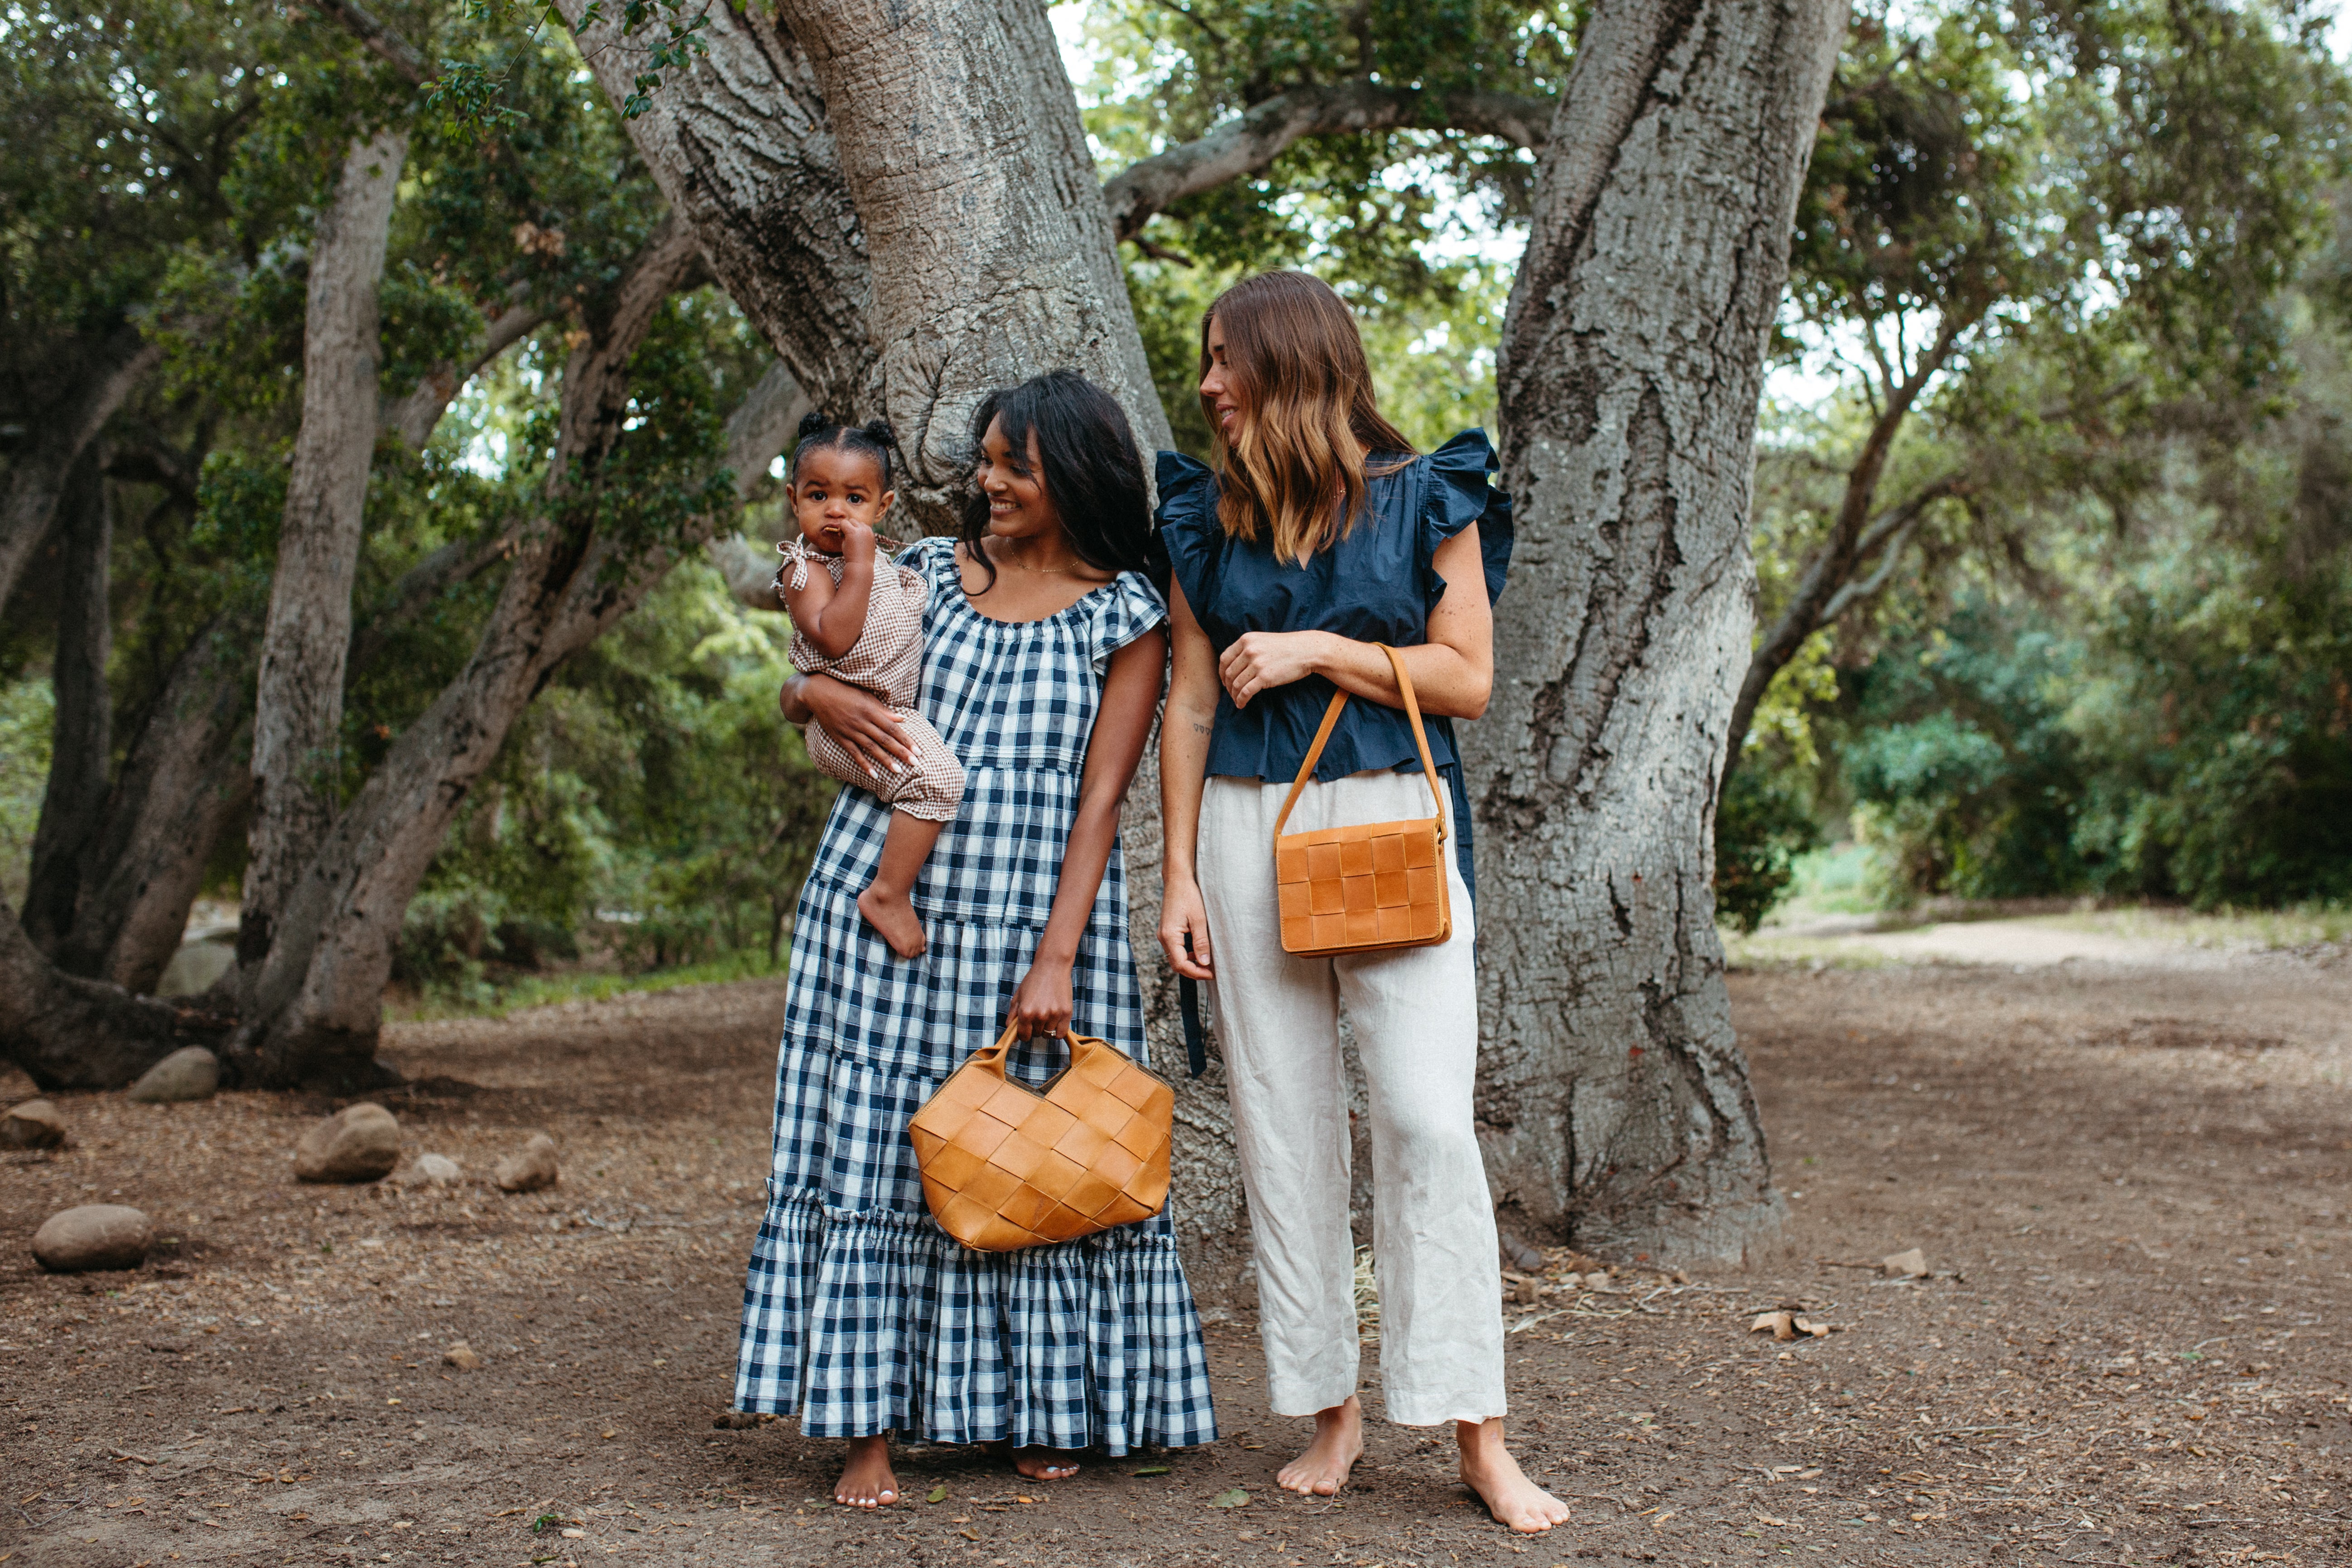 The Woven Collection, a Zero Waste Initiative